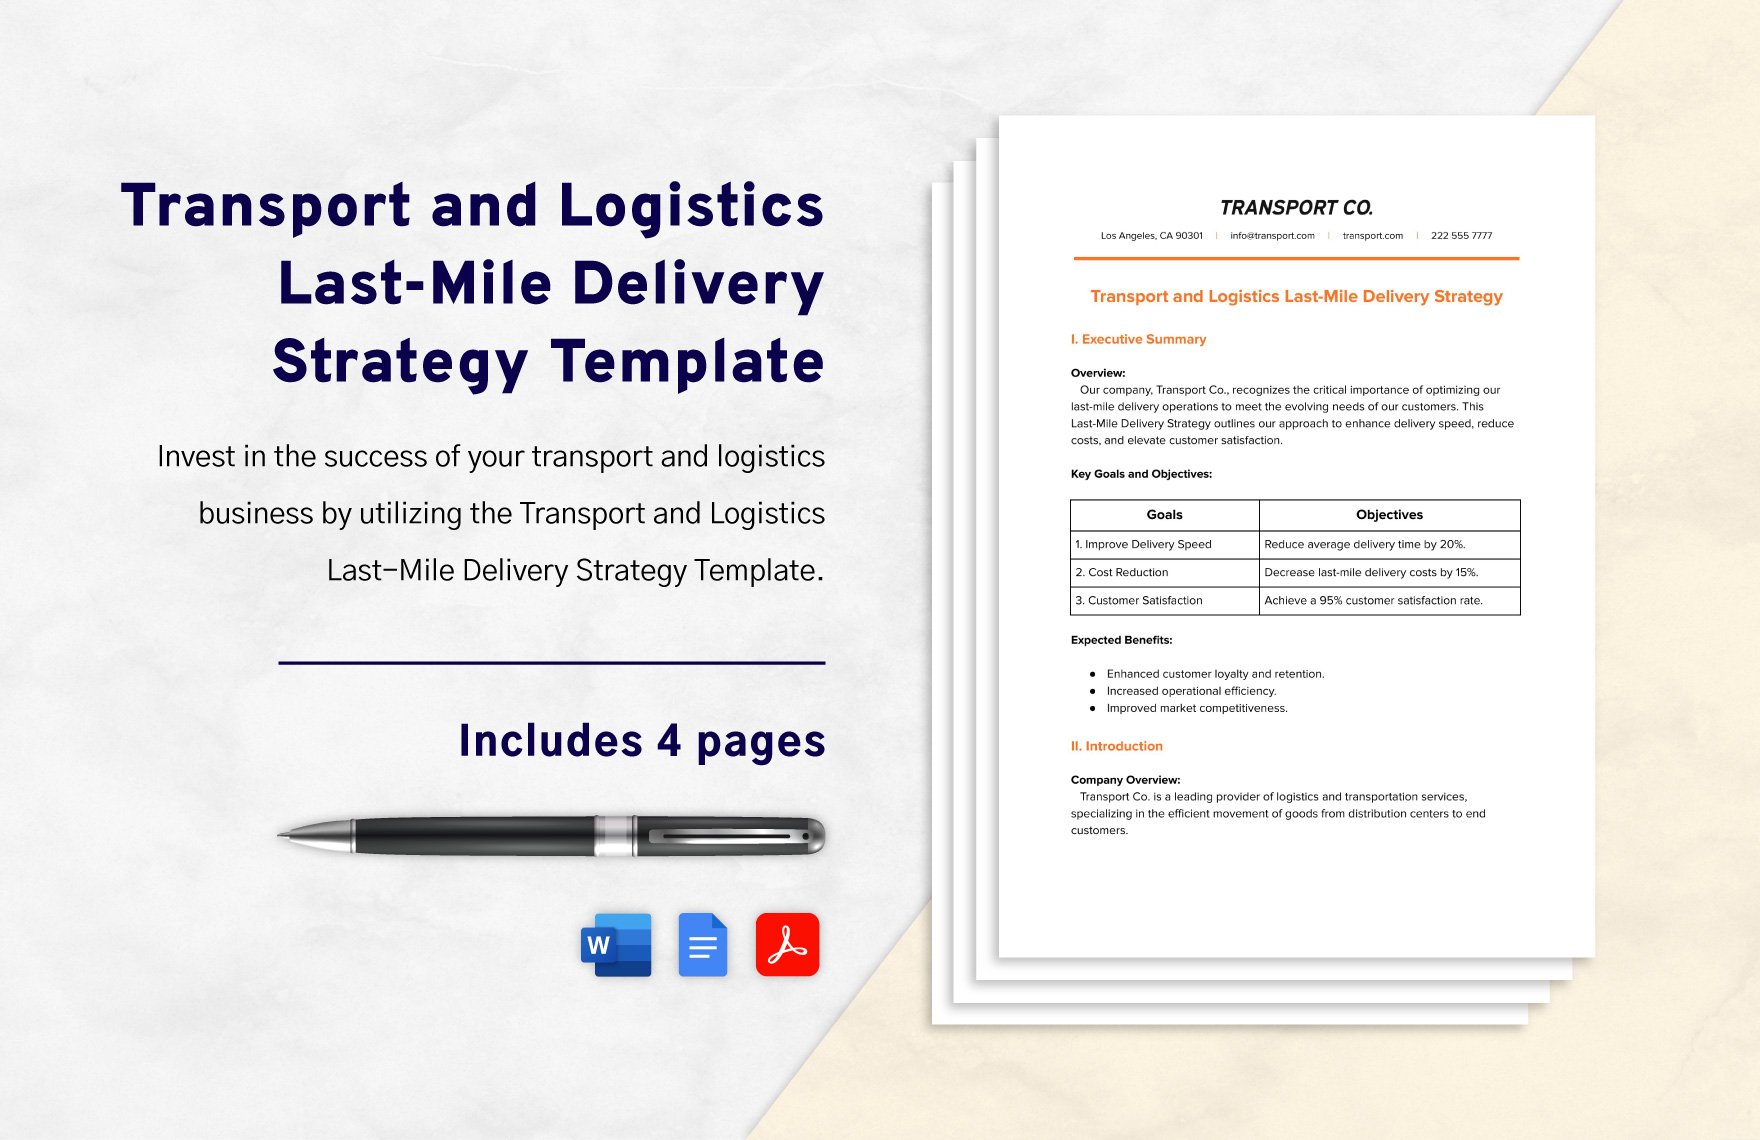 Transport and Logistics Last-Mile Delivery Strategy Template in Word, Google Docs, PDF